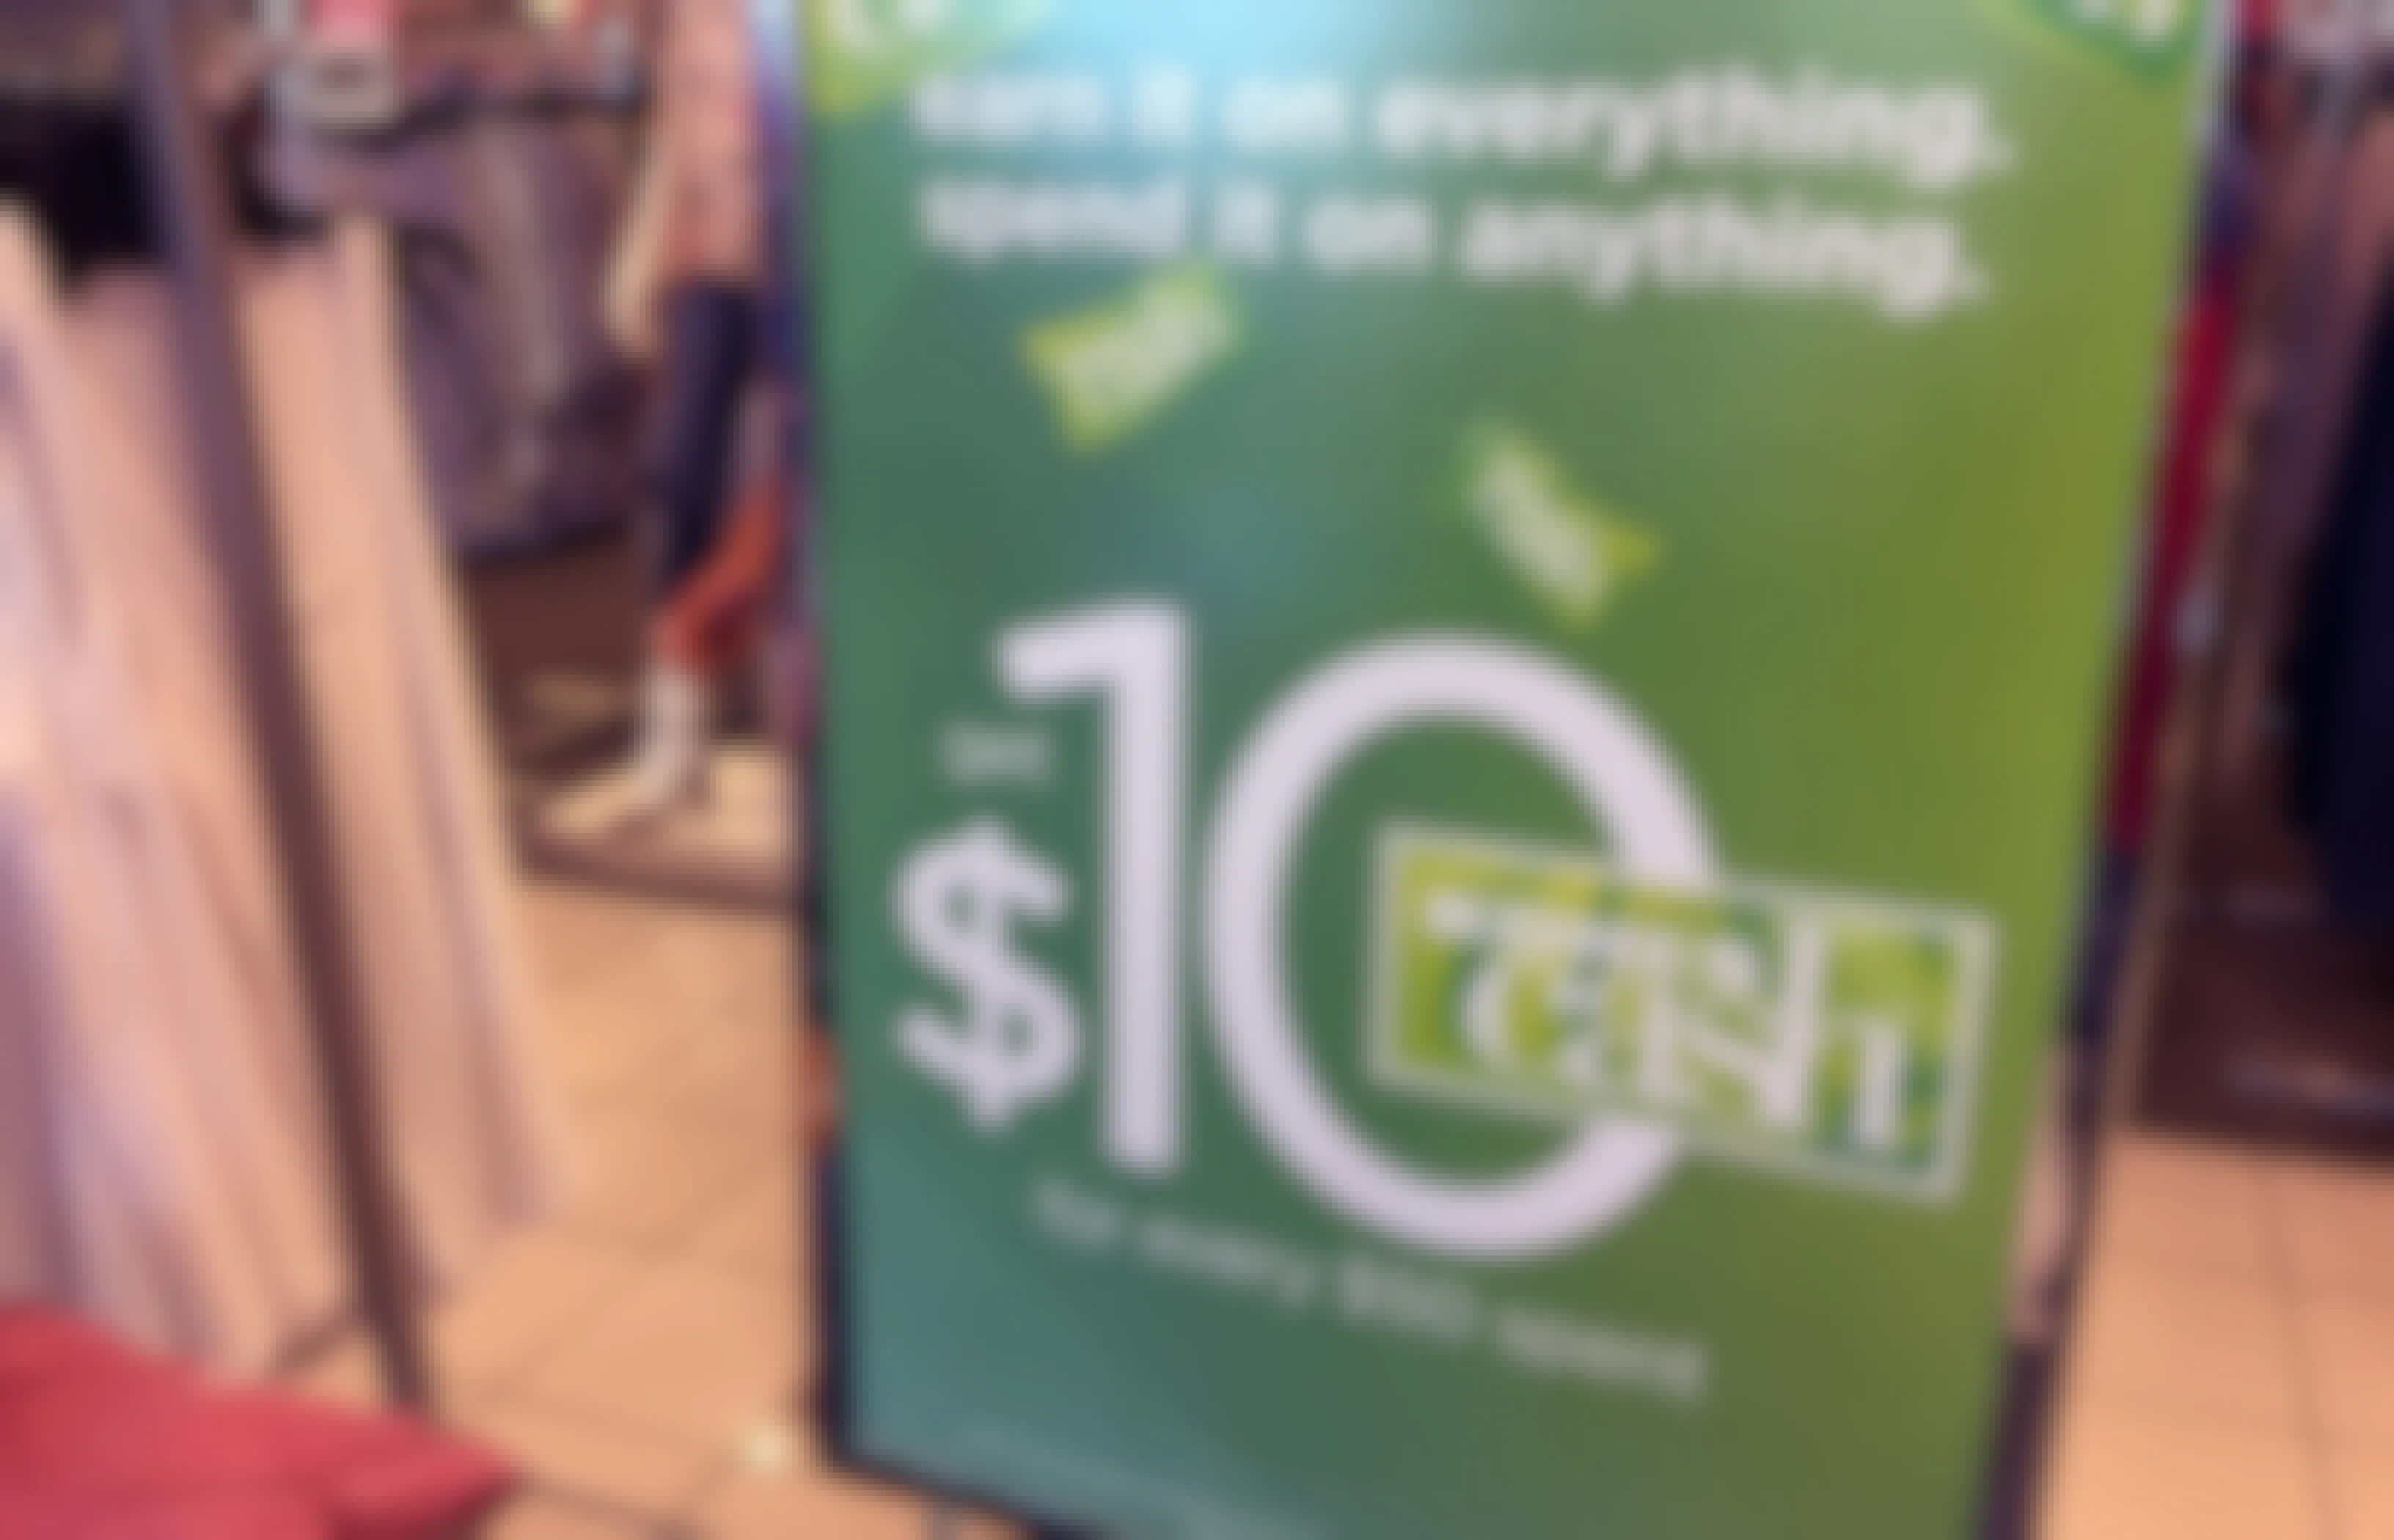 Green sign at Kohl's store advertises $10 Kohl's cash you can spend on anything in the store.